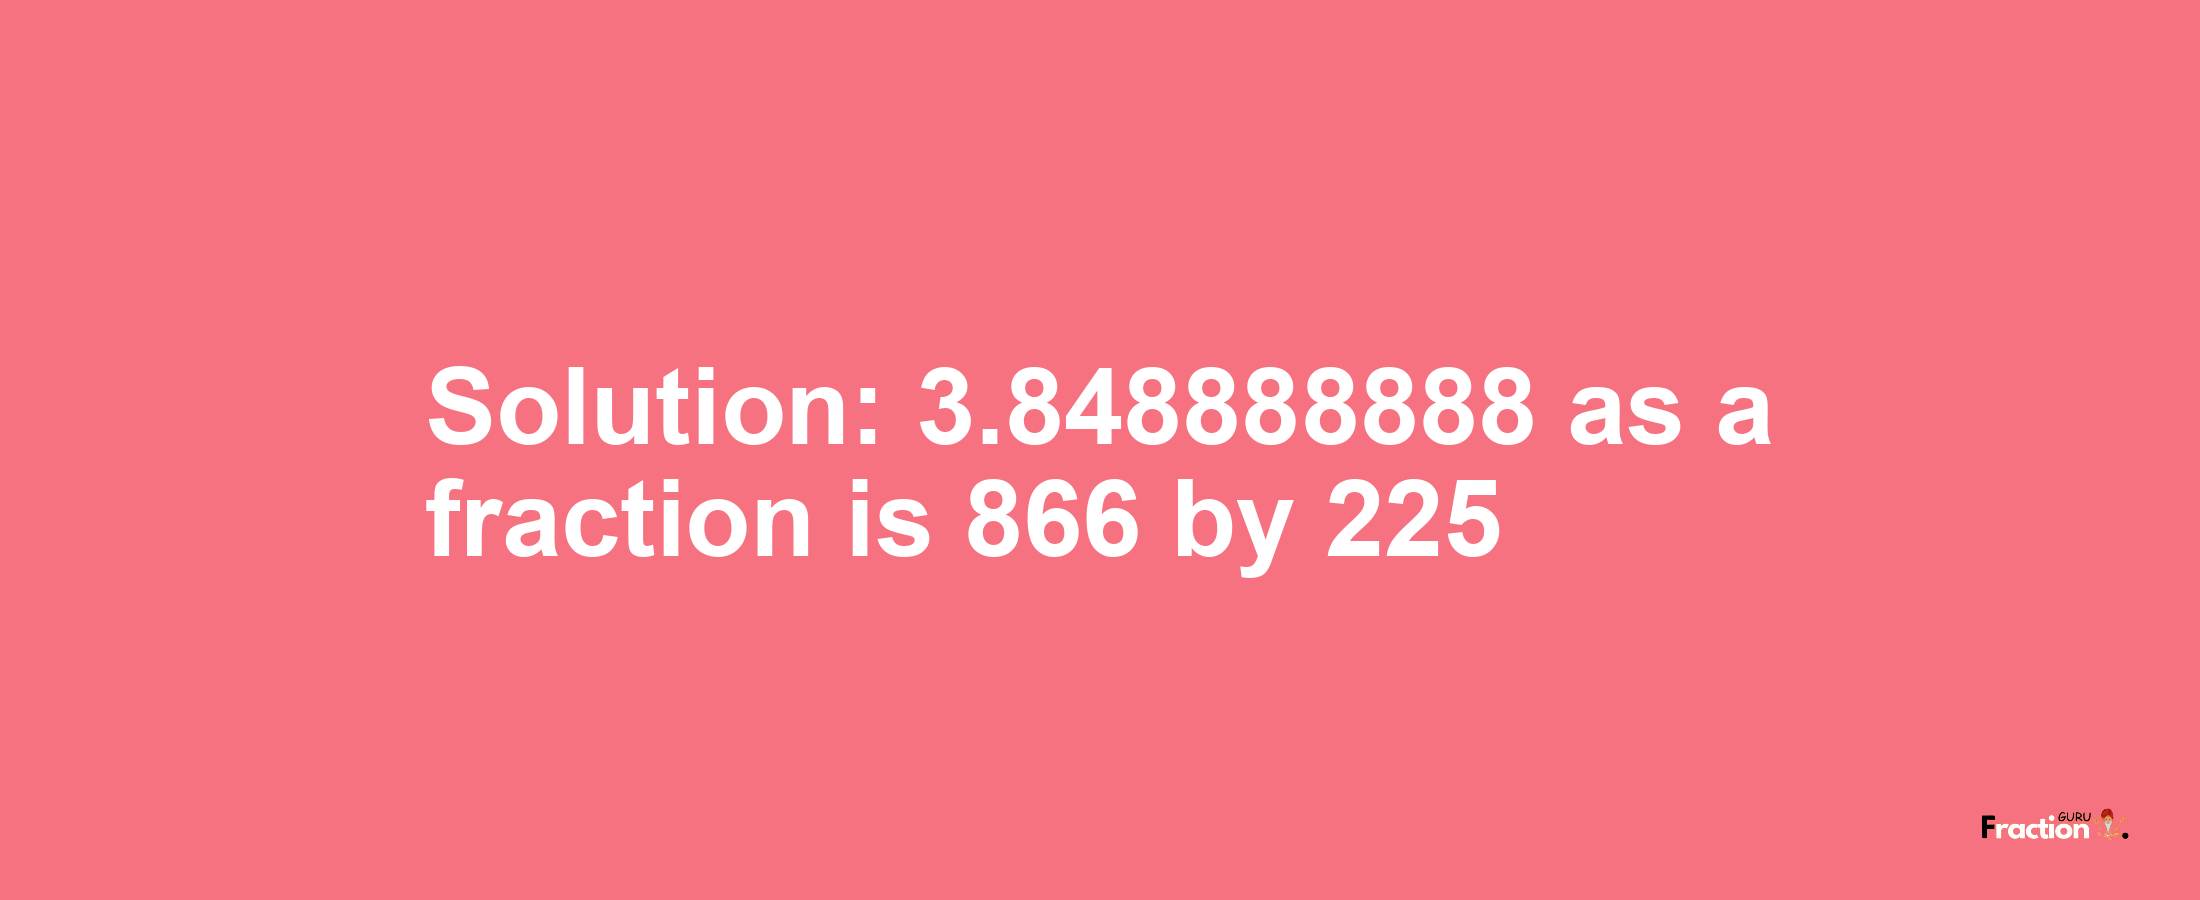 Solution:3.848888888 as a fraction is 866/225